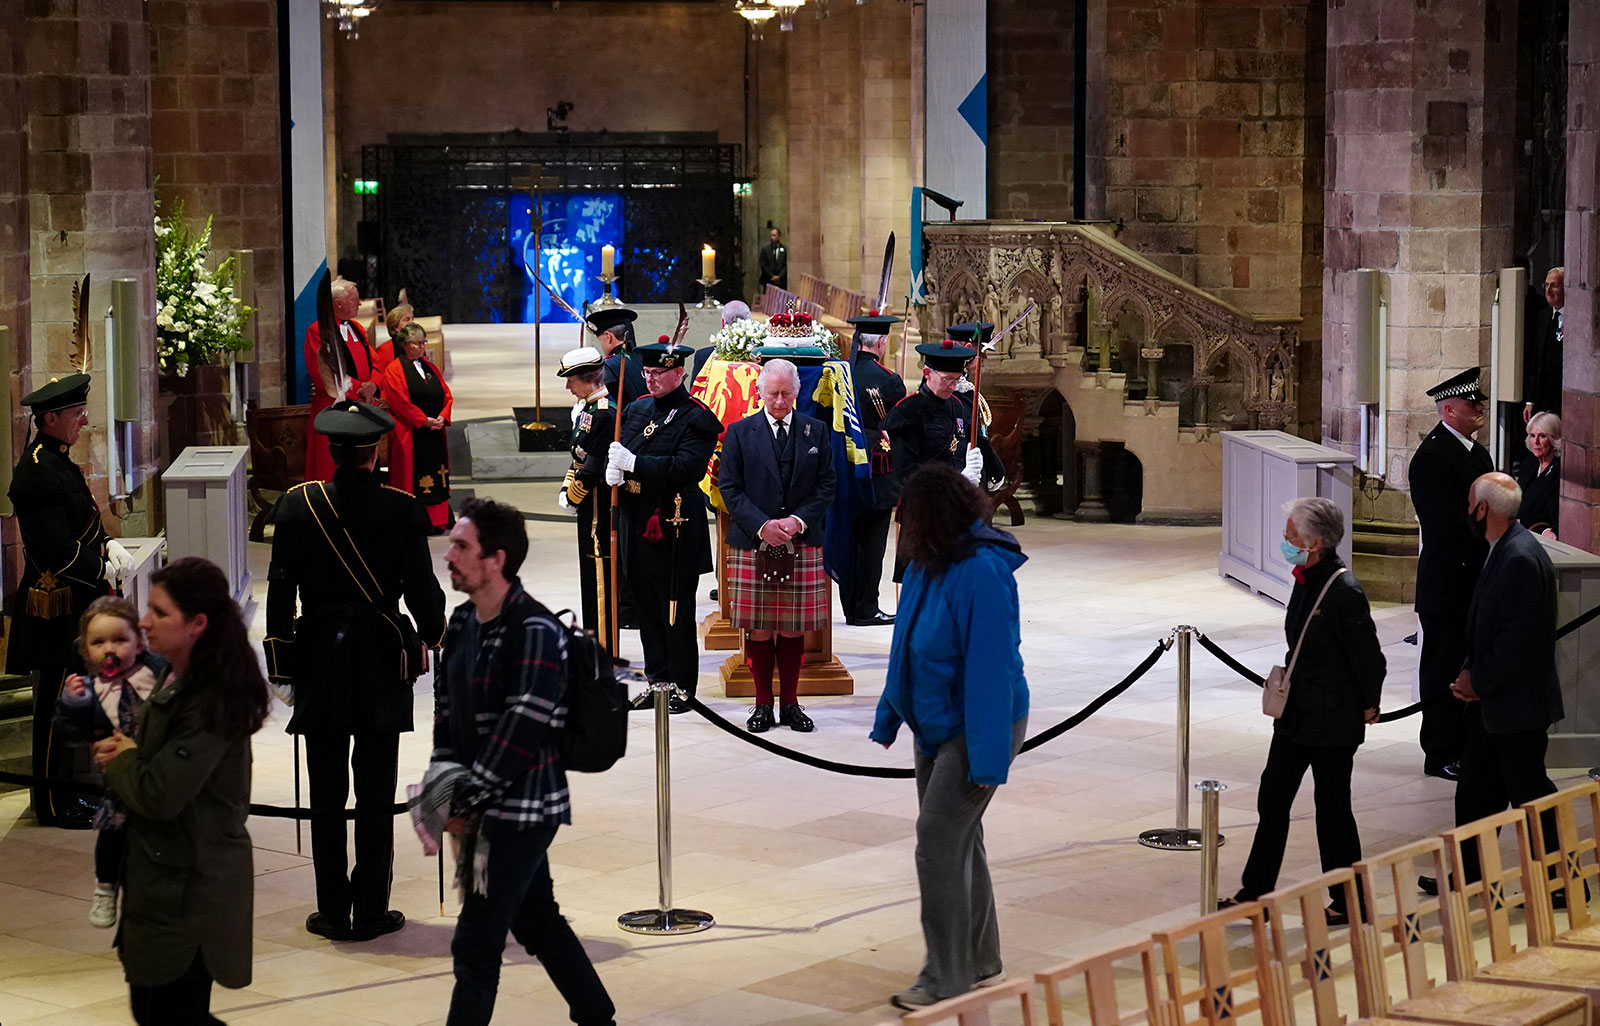 King Charles III, his wife Camilla, the Queen Consort, and other members of the royal family hold a vigil at St. Giles' Cathedral in honor of Queen Elizabeth II Monday evening.